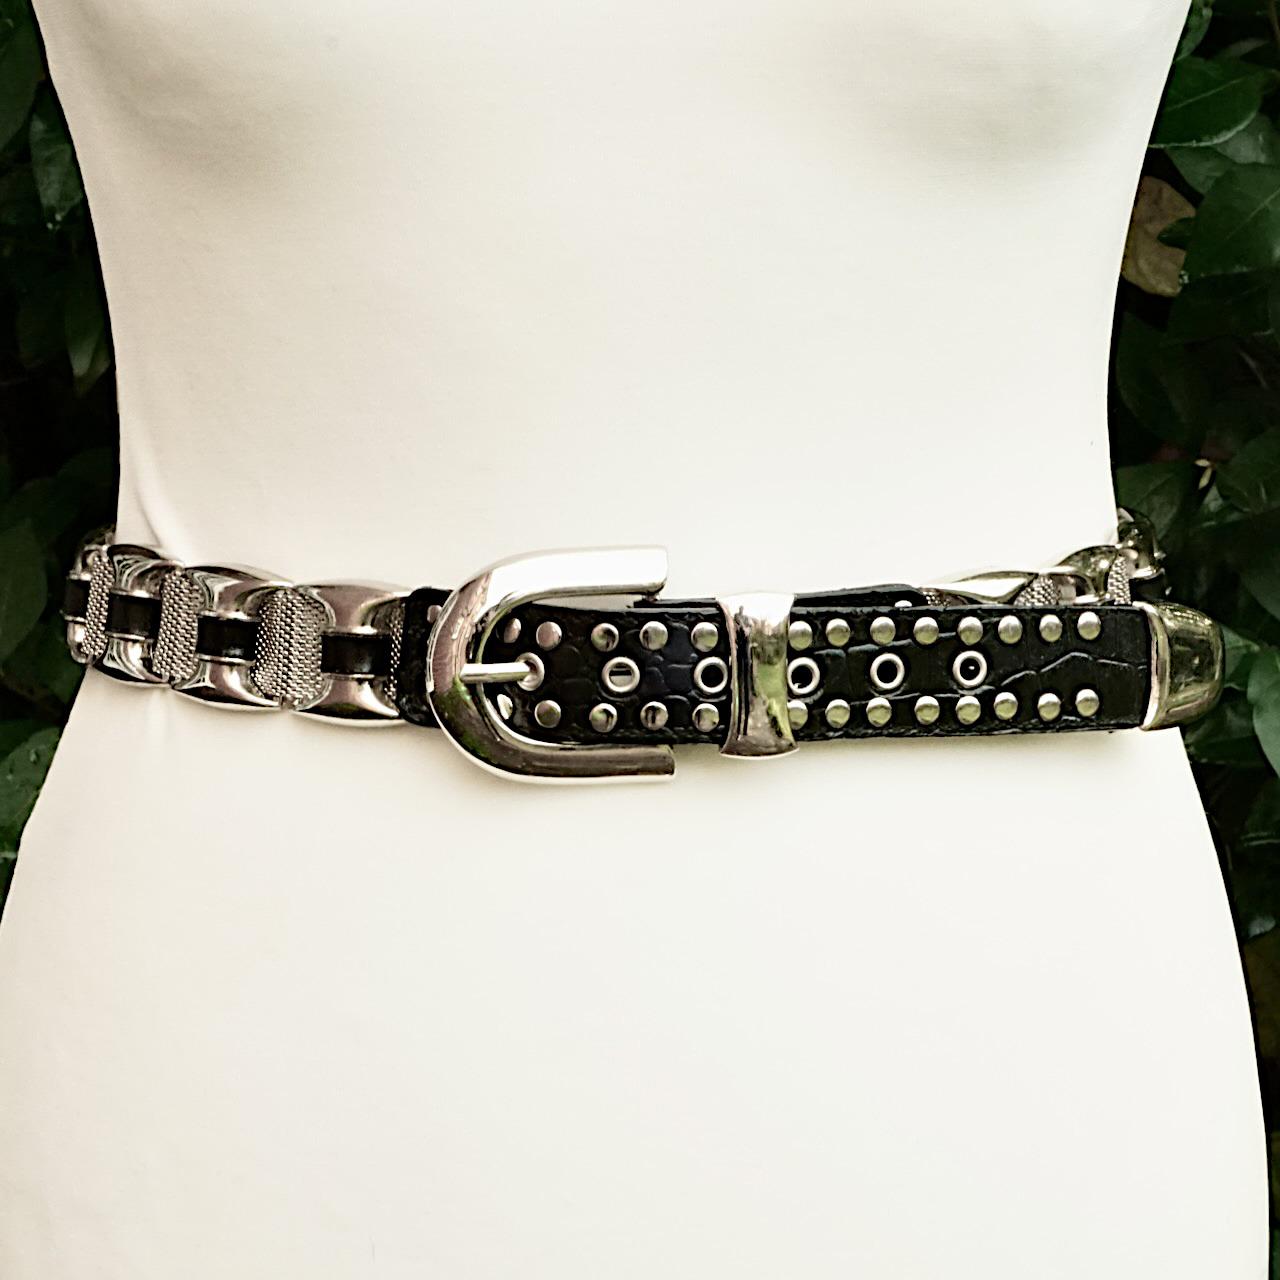 Wonderful silver tone and black leather belt, featuring decorative mesh links and stud detail. The belt is adjustable, from a wearable length of 95.5 cm / 37.6 inches to 85.5 cm /  33.6 inches, and the width is 3.35 cm / 1.3 inches. The buckle